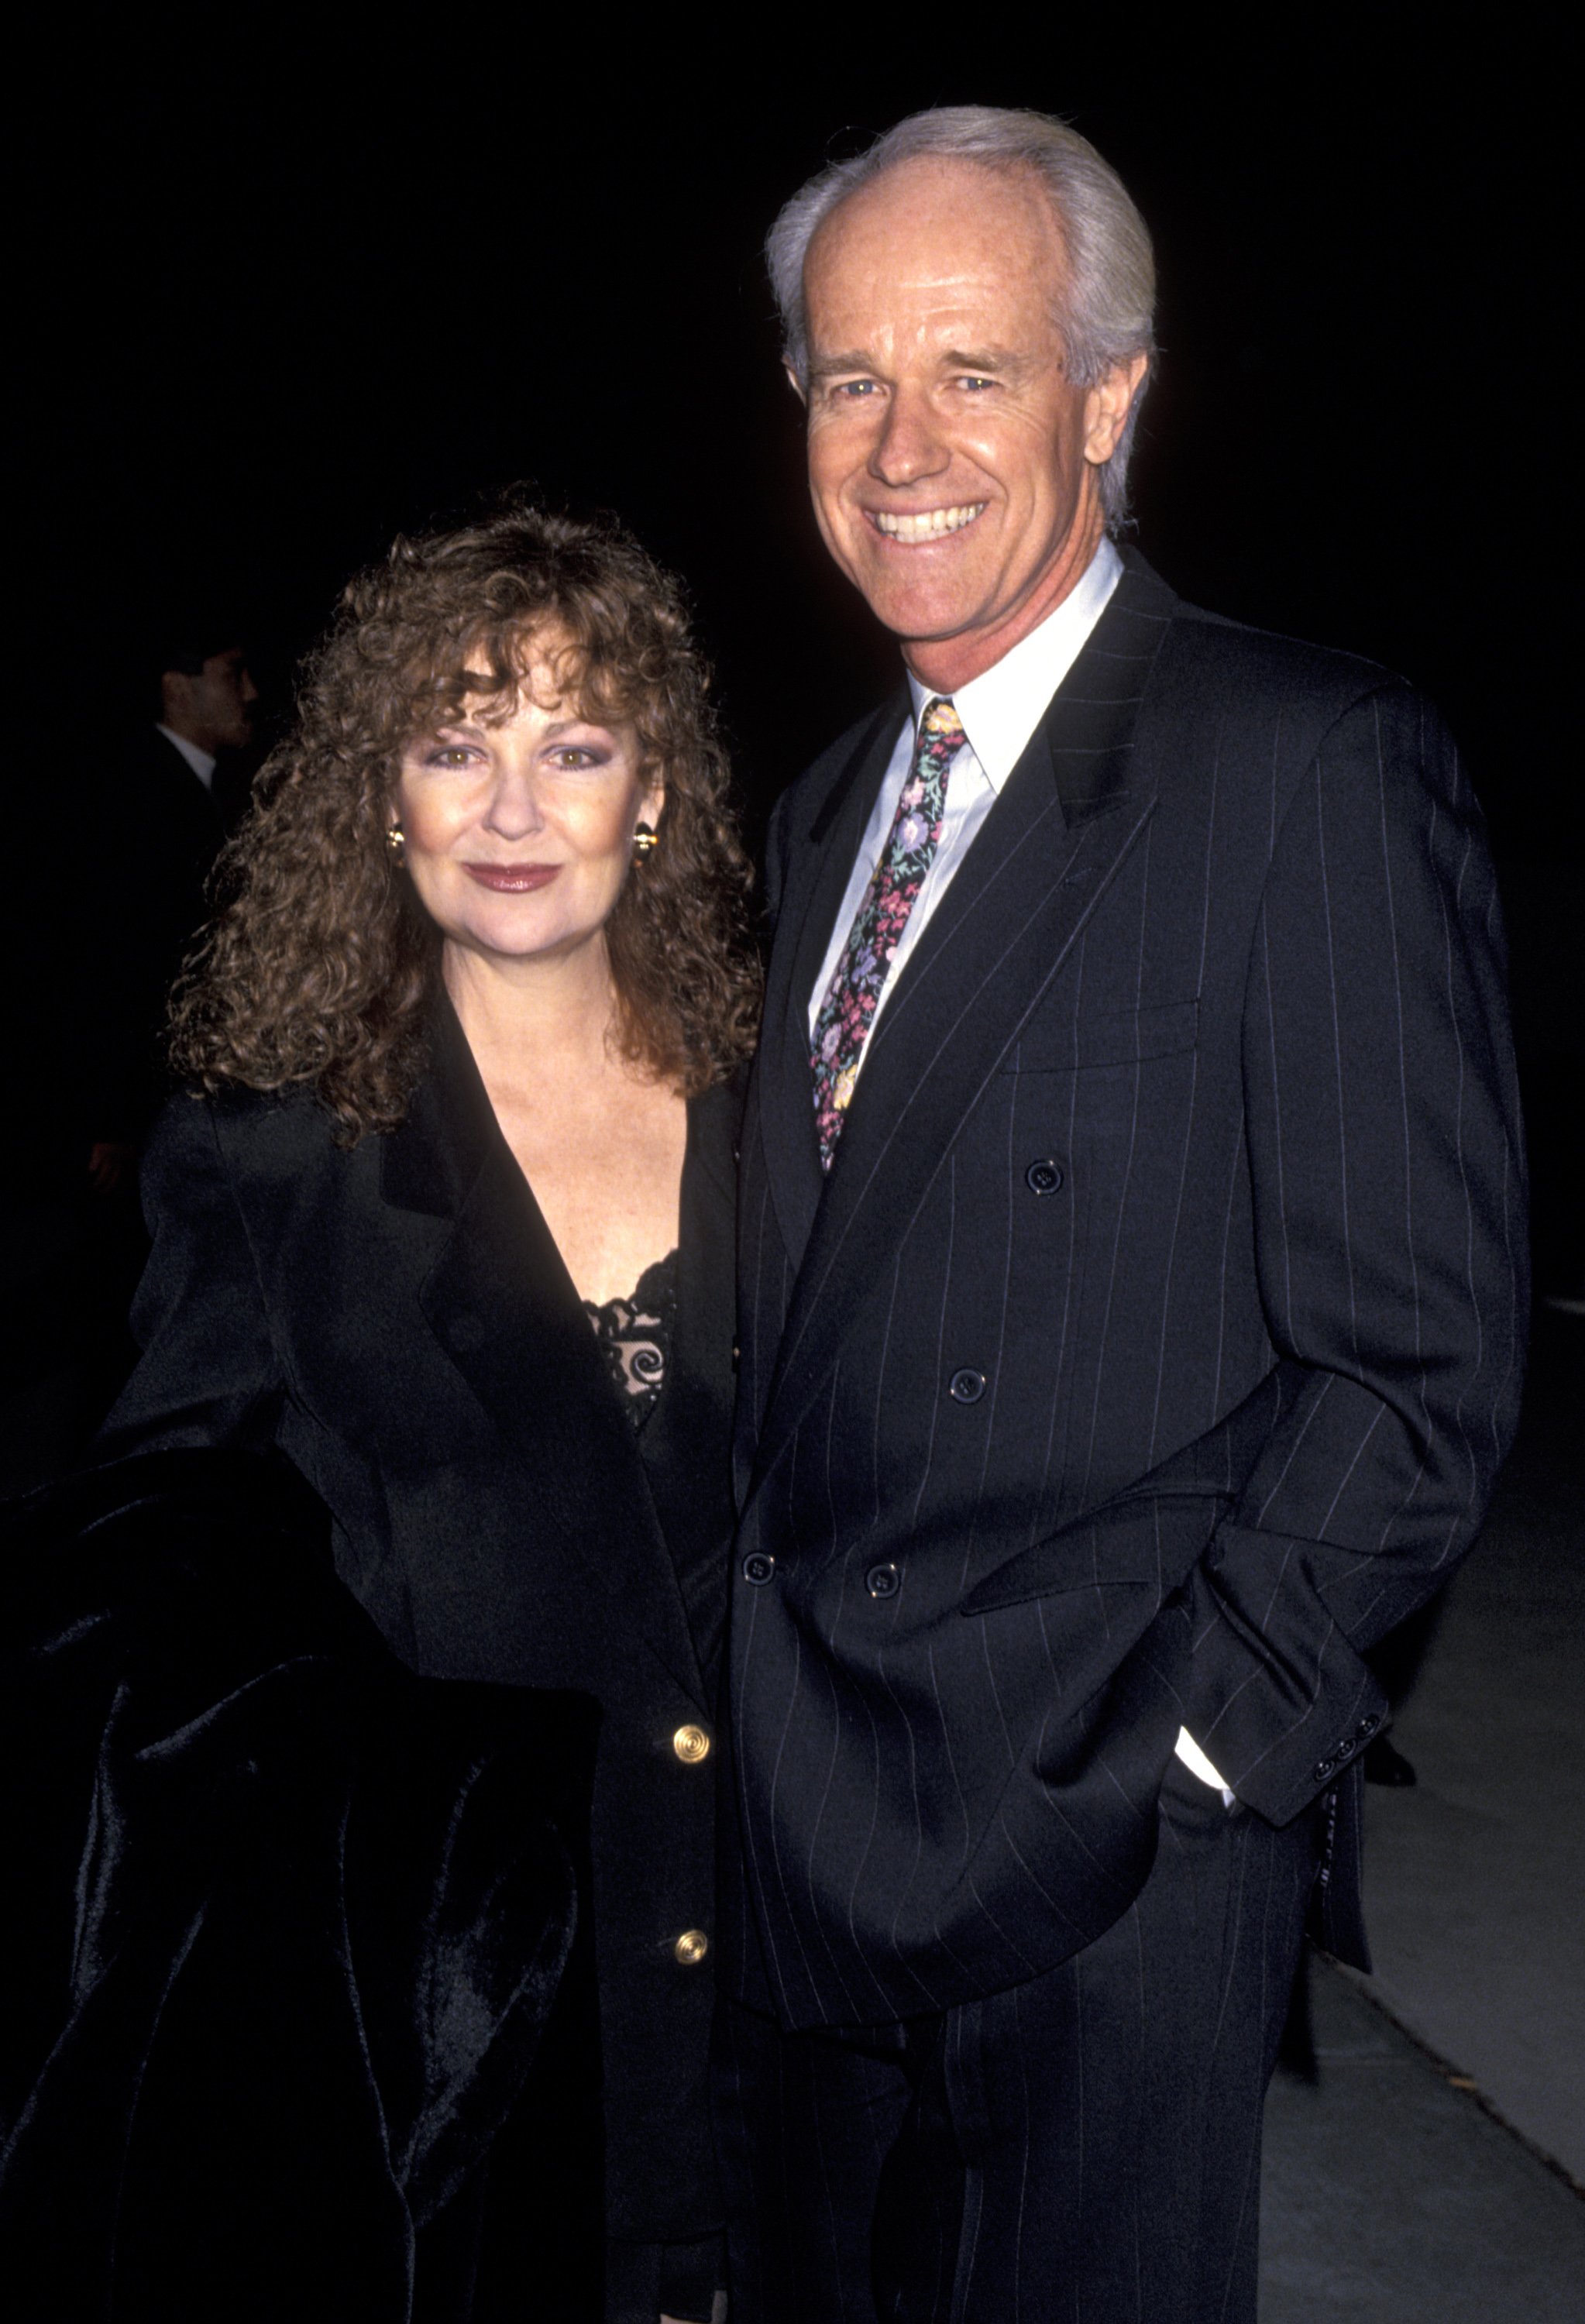 Shelley Fabares and Mike Farrell attend the APLA Commitment to Live VII at Universal Studios on January 27, 1994 in Universal City, California. | Source: Getty Images